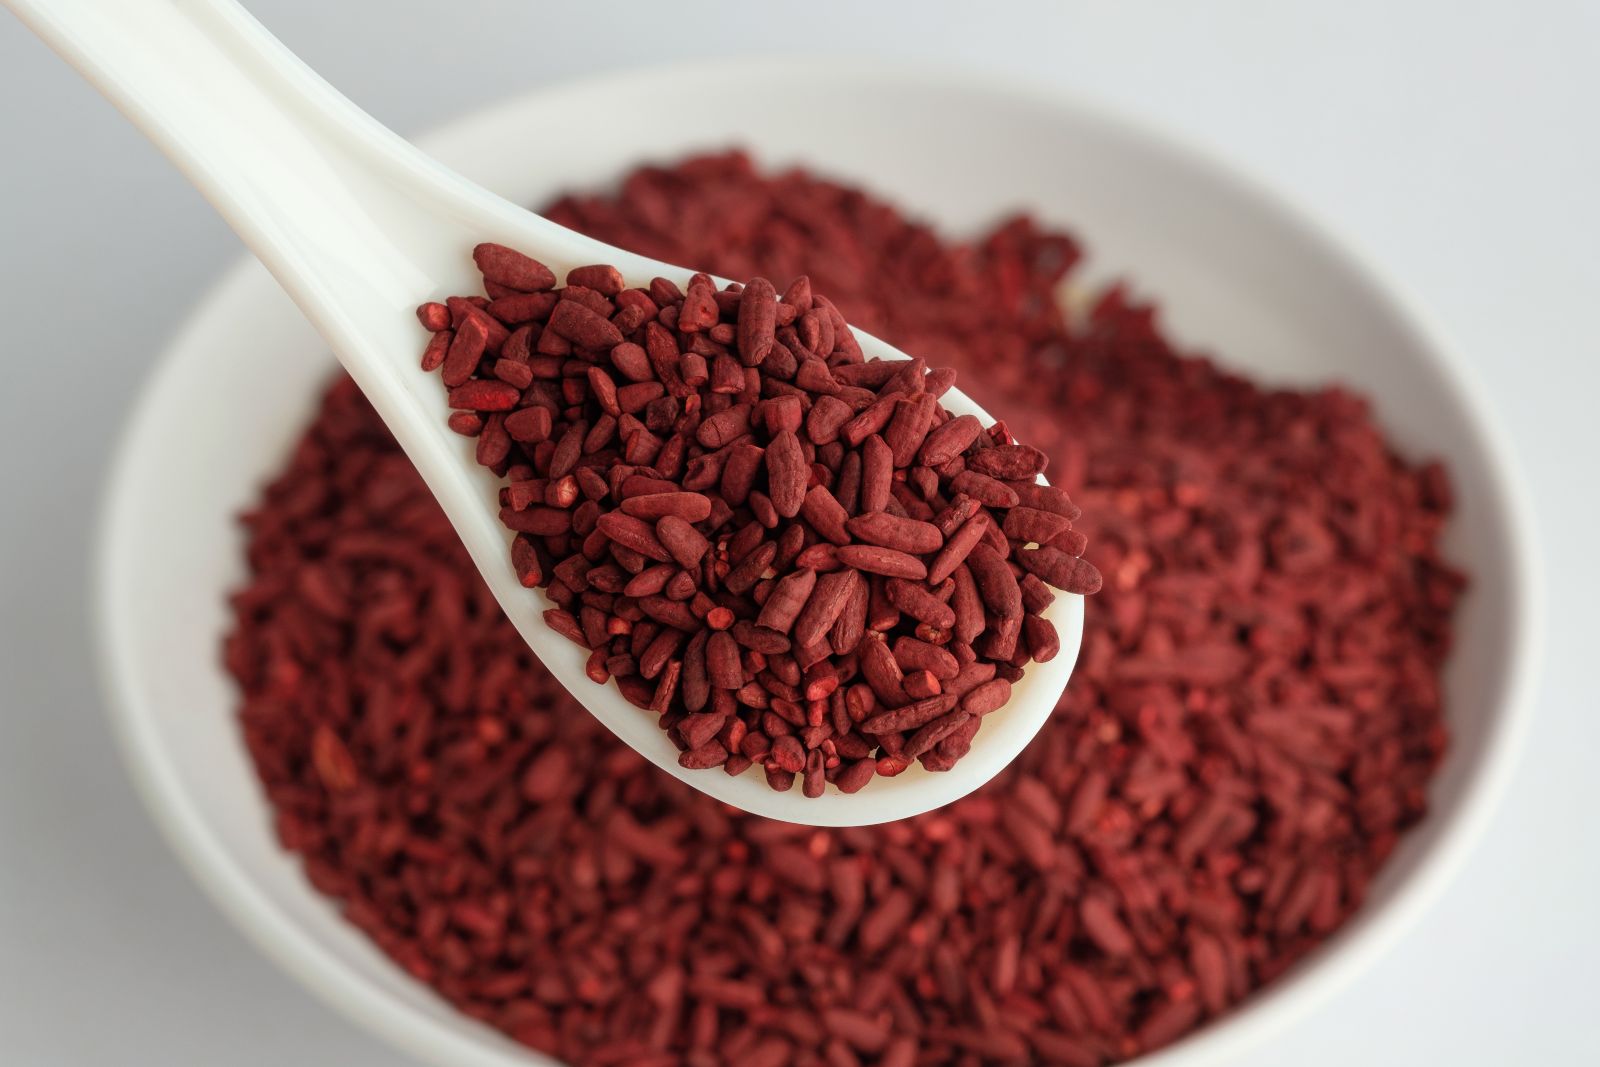 Red yeast rice is rice with a characteristic red color. The color is due to the fact that it is grown with a yeast fungus.